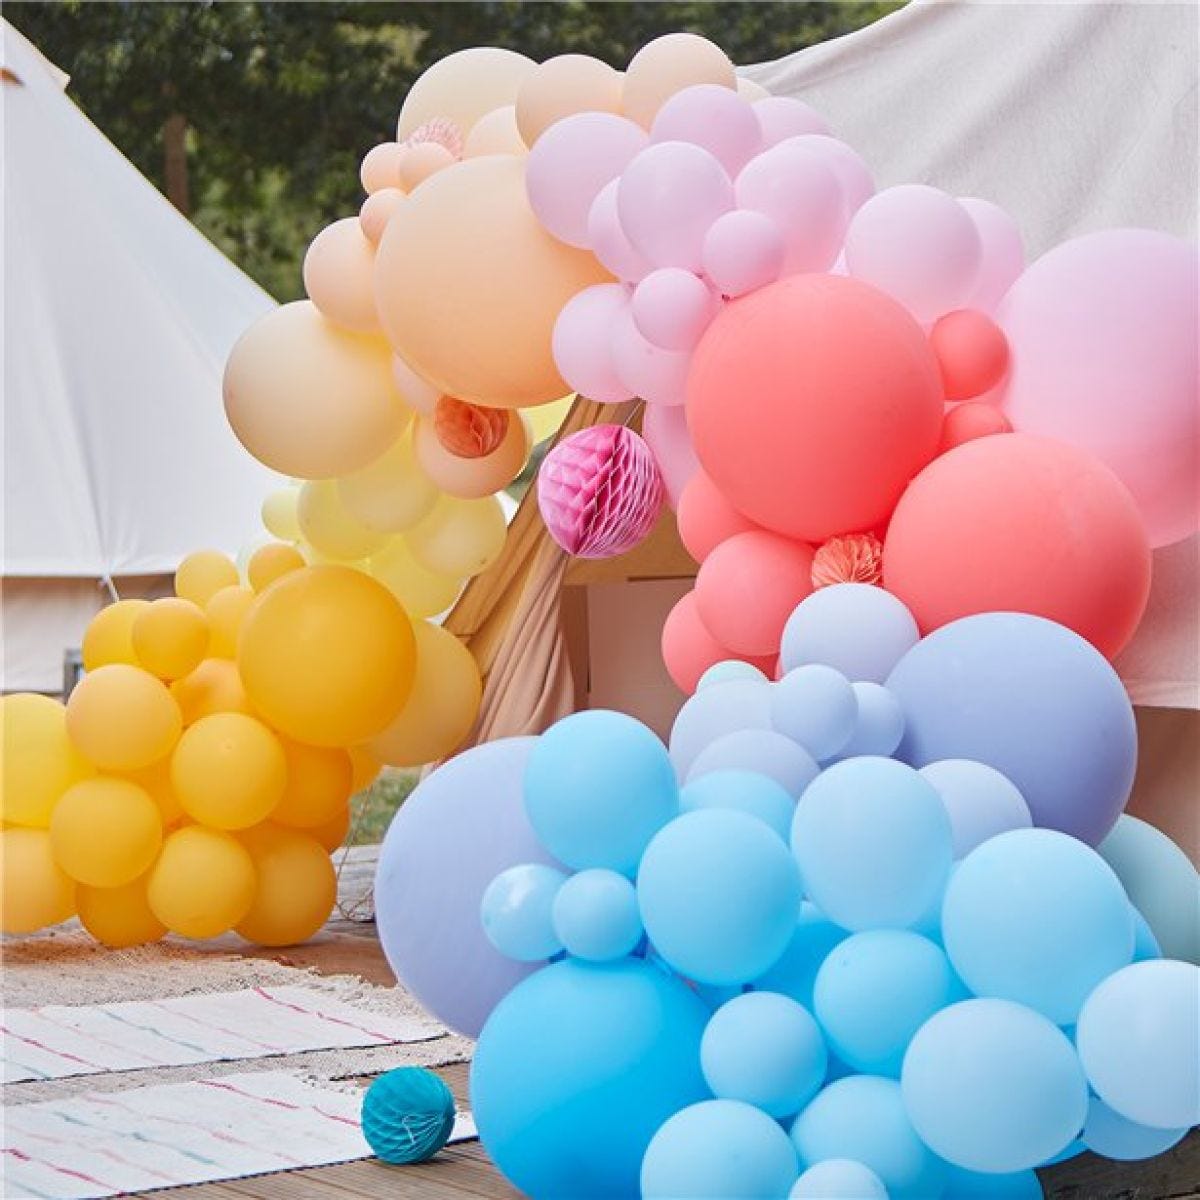 Brights & Fans Balloon Arch Backdrop